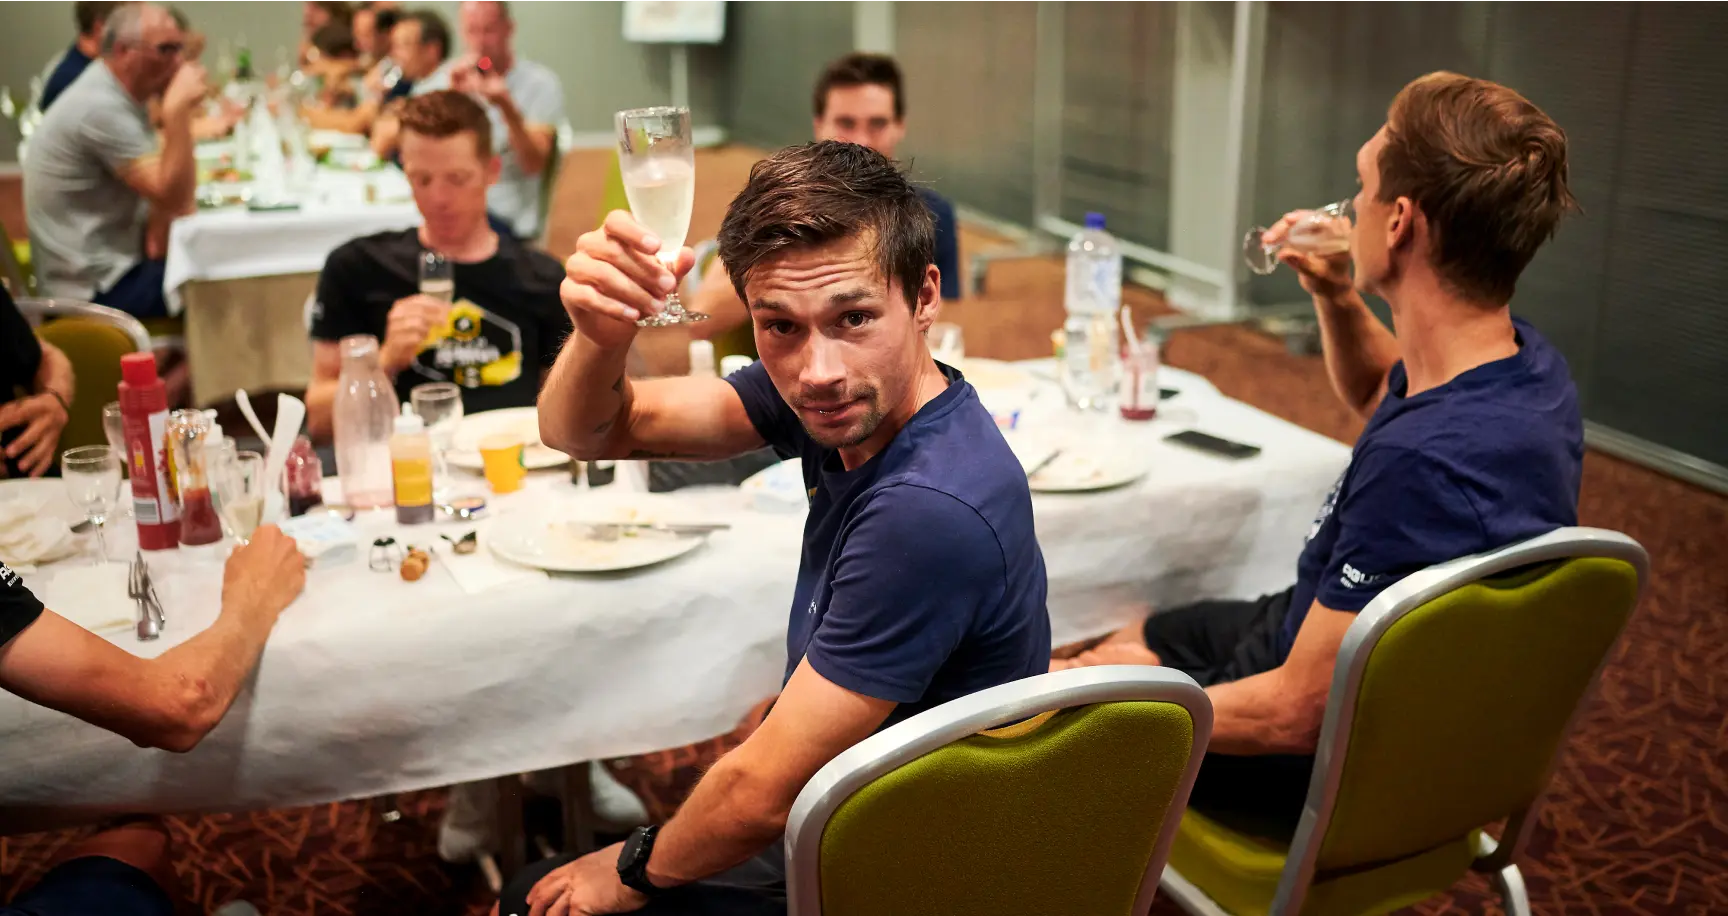 Primoz Roglic making a toast with a glass of champagne